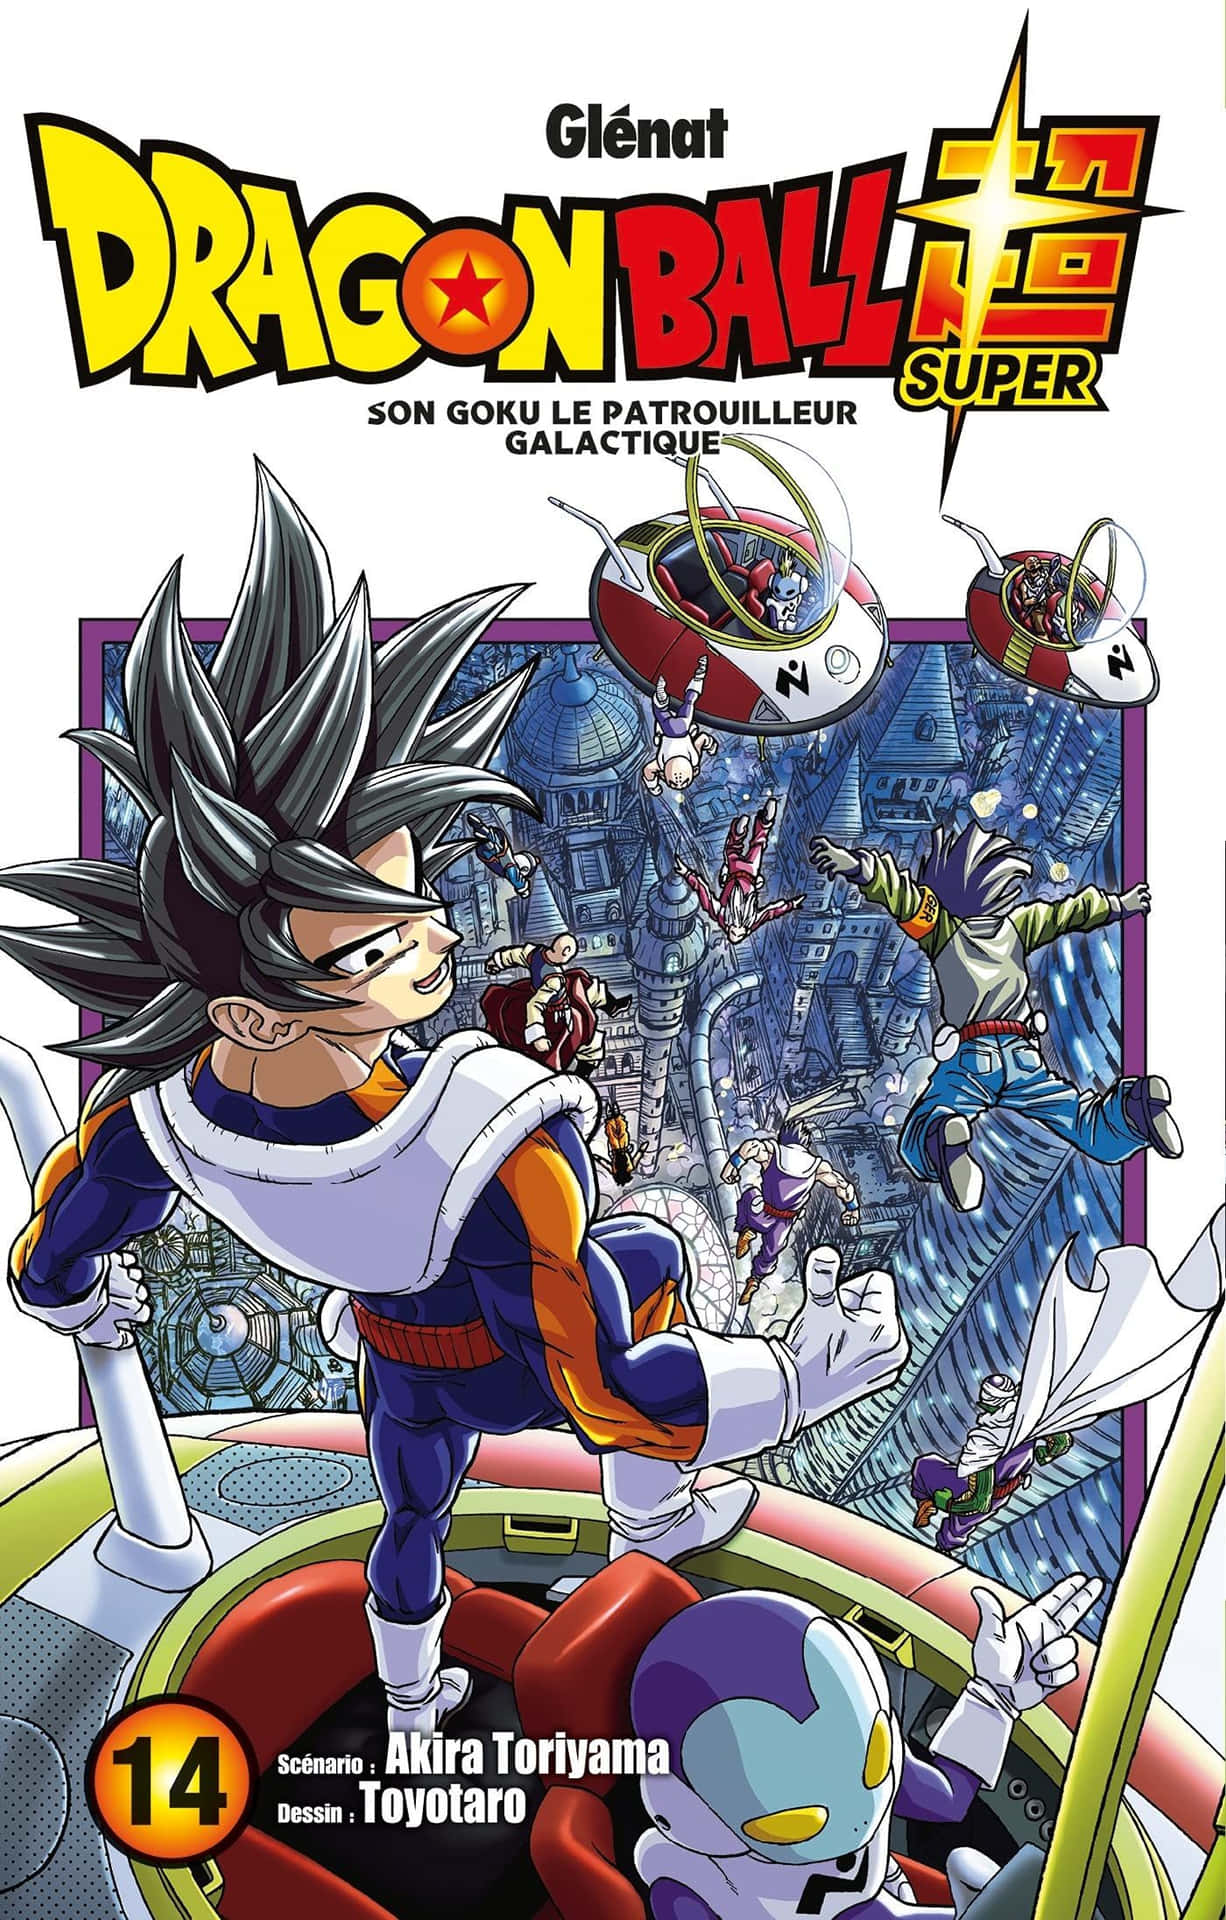 A thrilling illustration of Goku and Vegeta from the Dragon Ball Super Manga Wallpaper